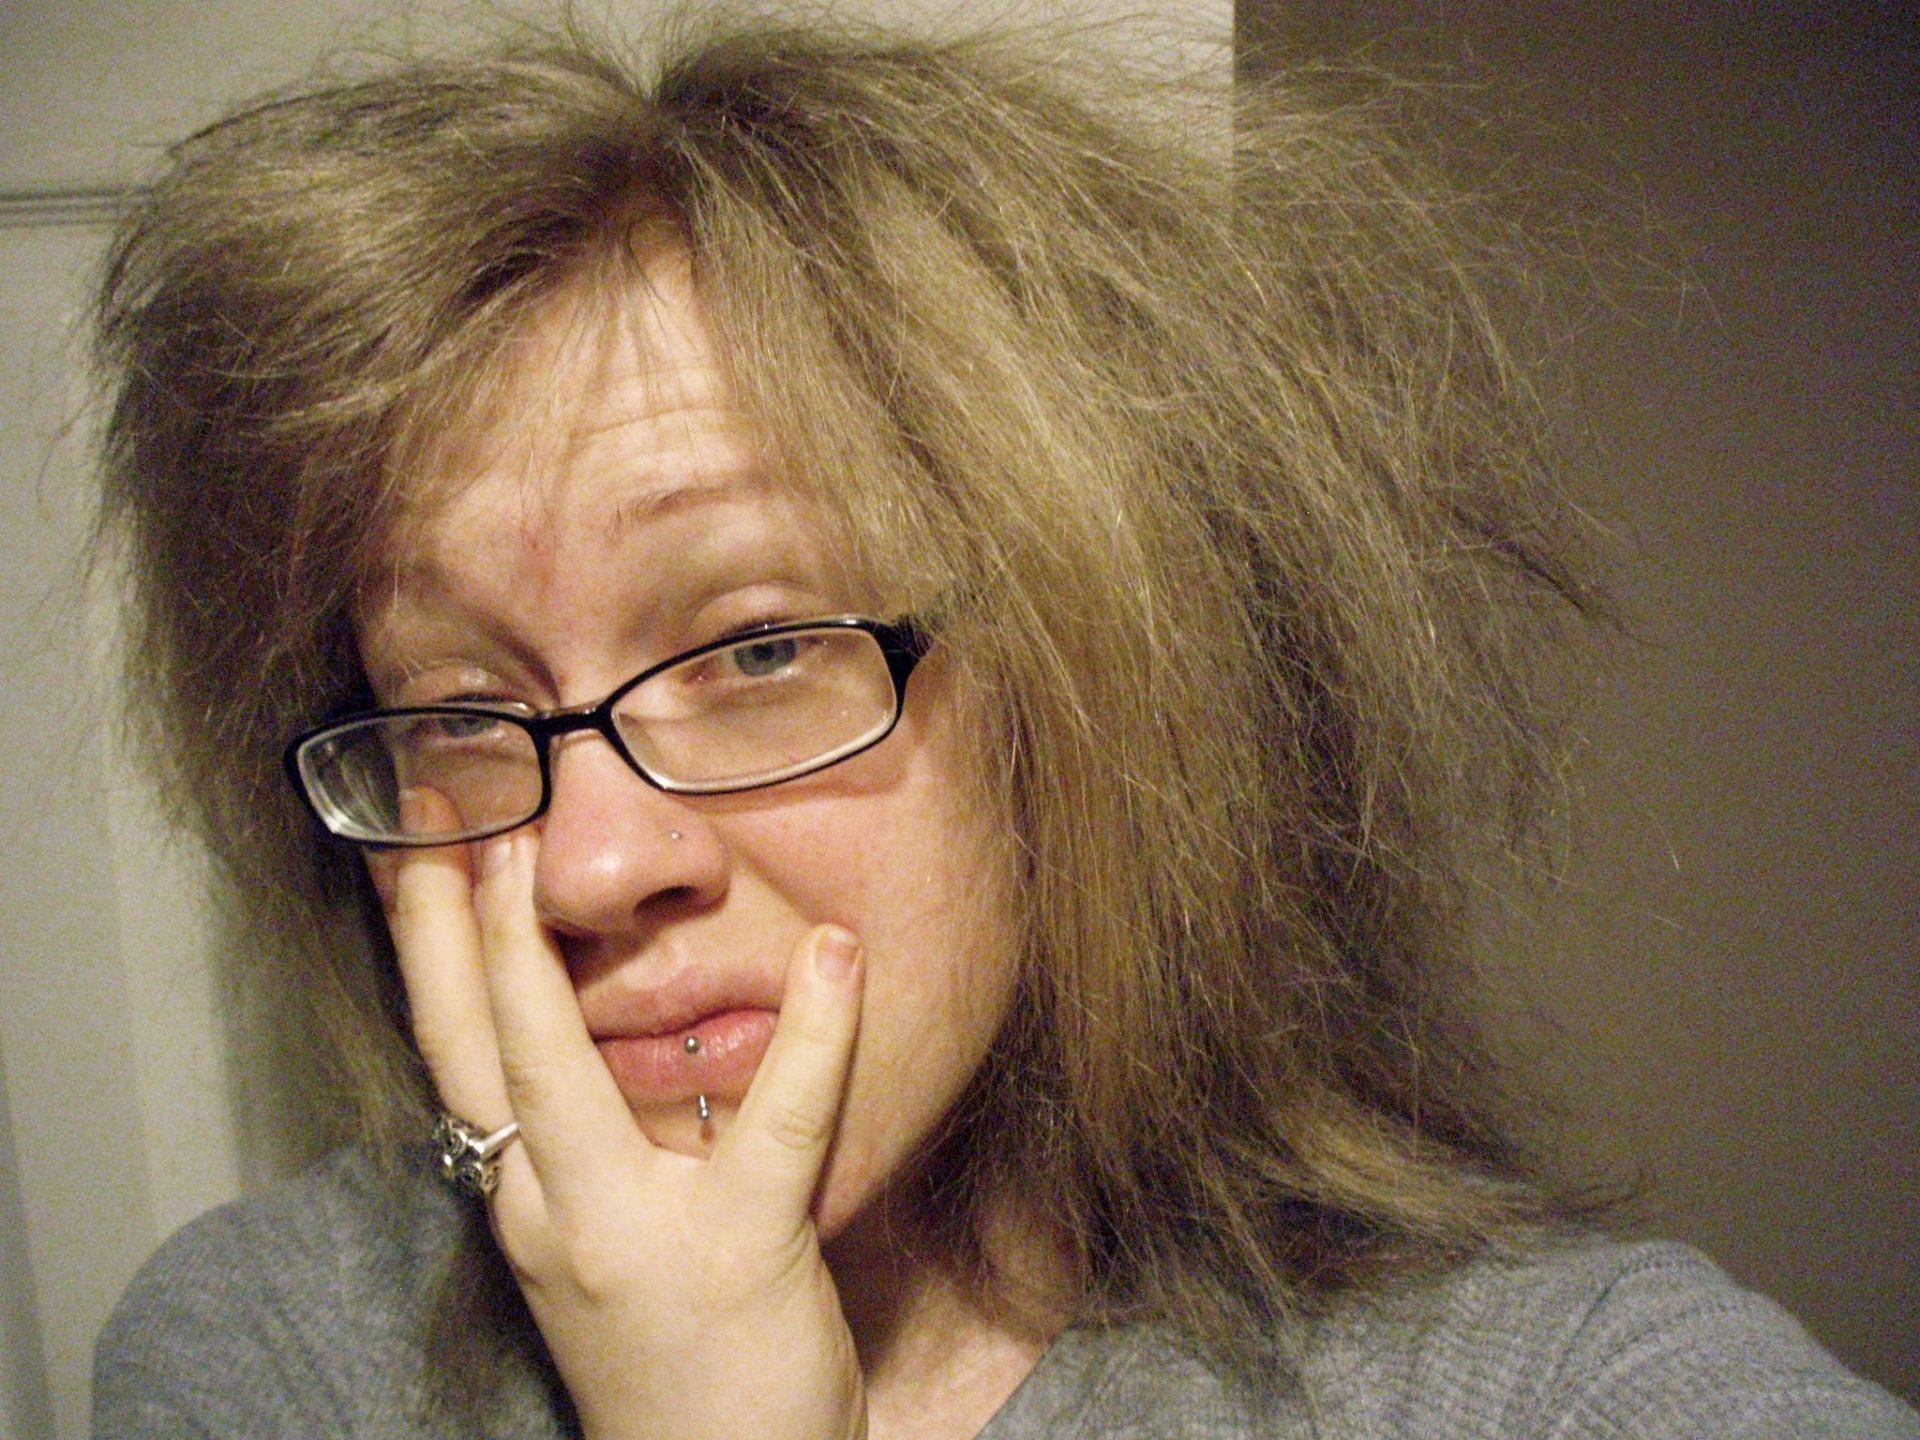 If you have ever woken up looking like this, you know what I am talking about (Image via Flickr)